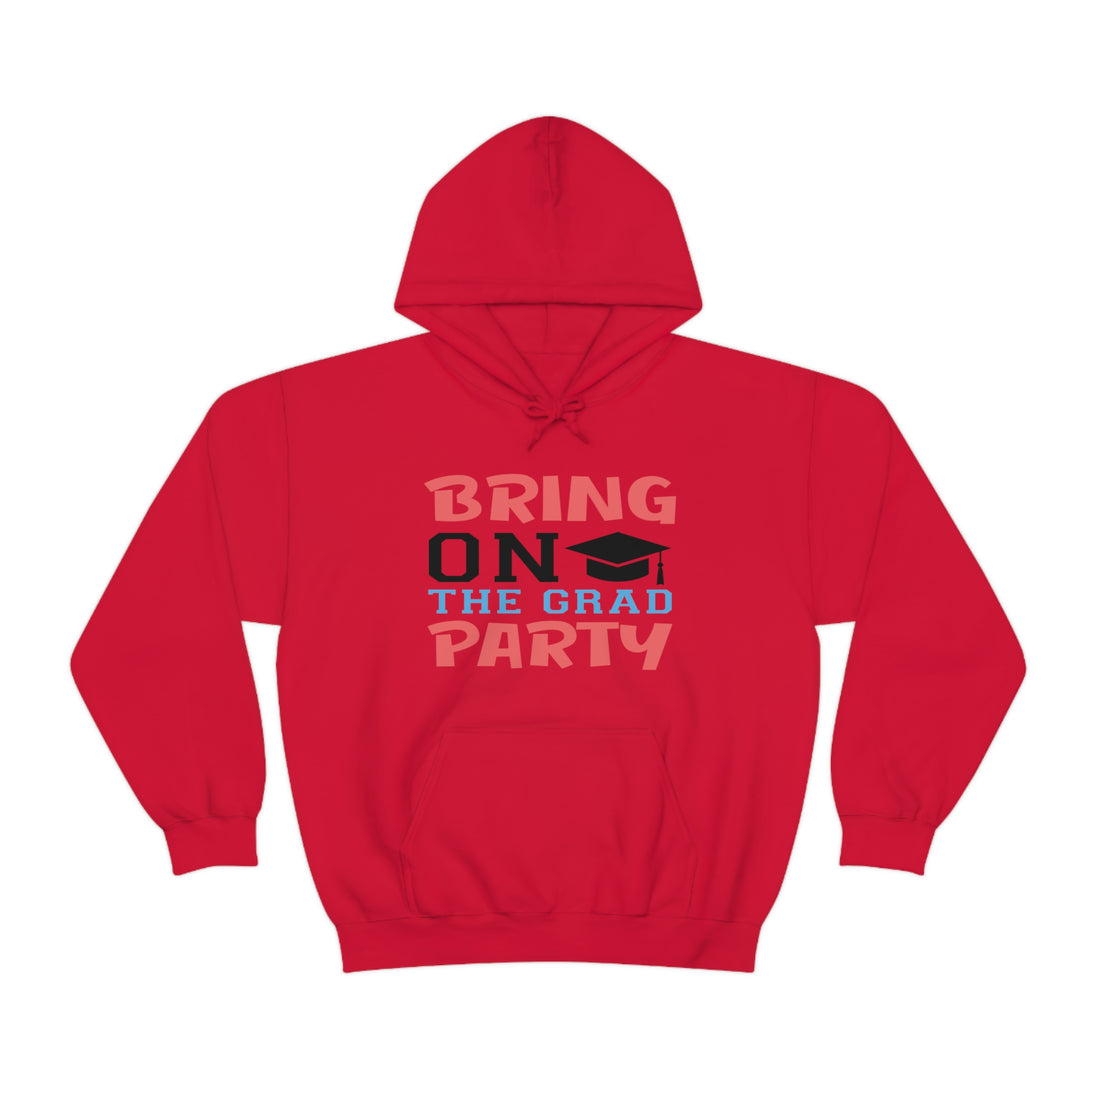 Bring On The Grad Party - Unisex Heavy Blend™ Hooded Sweatshirt